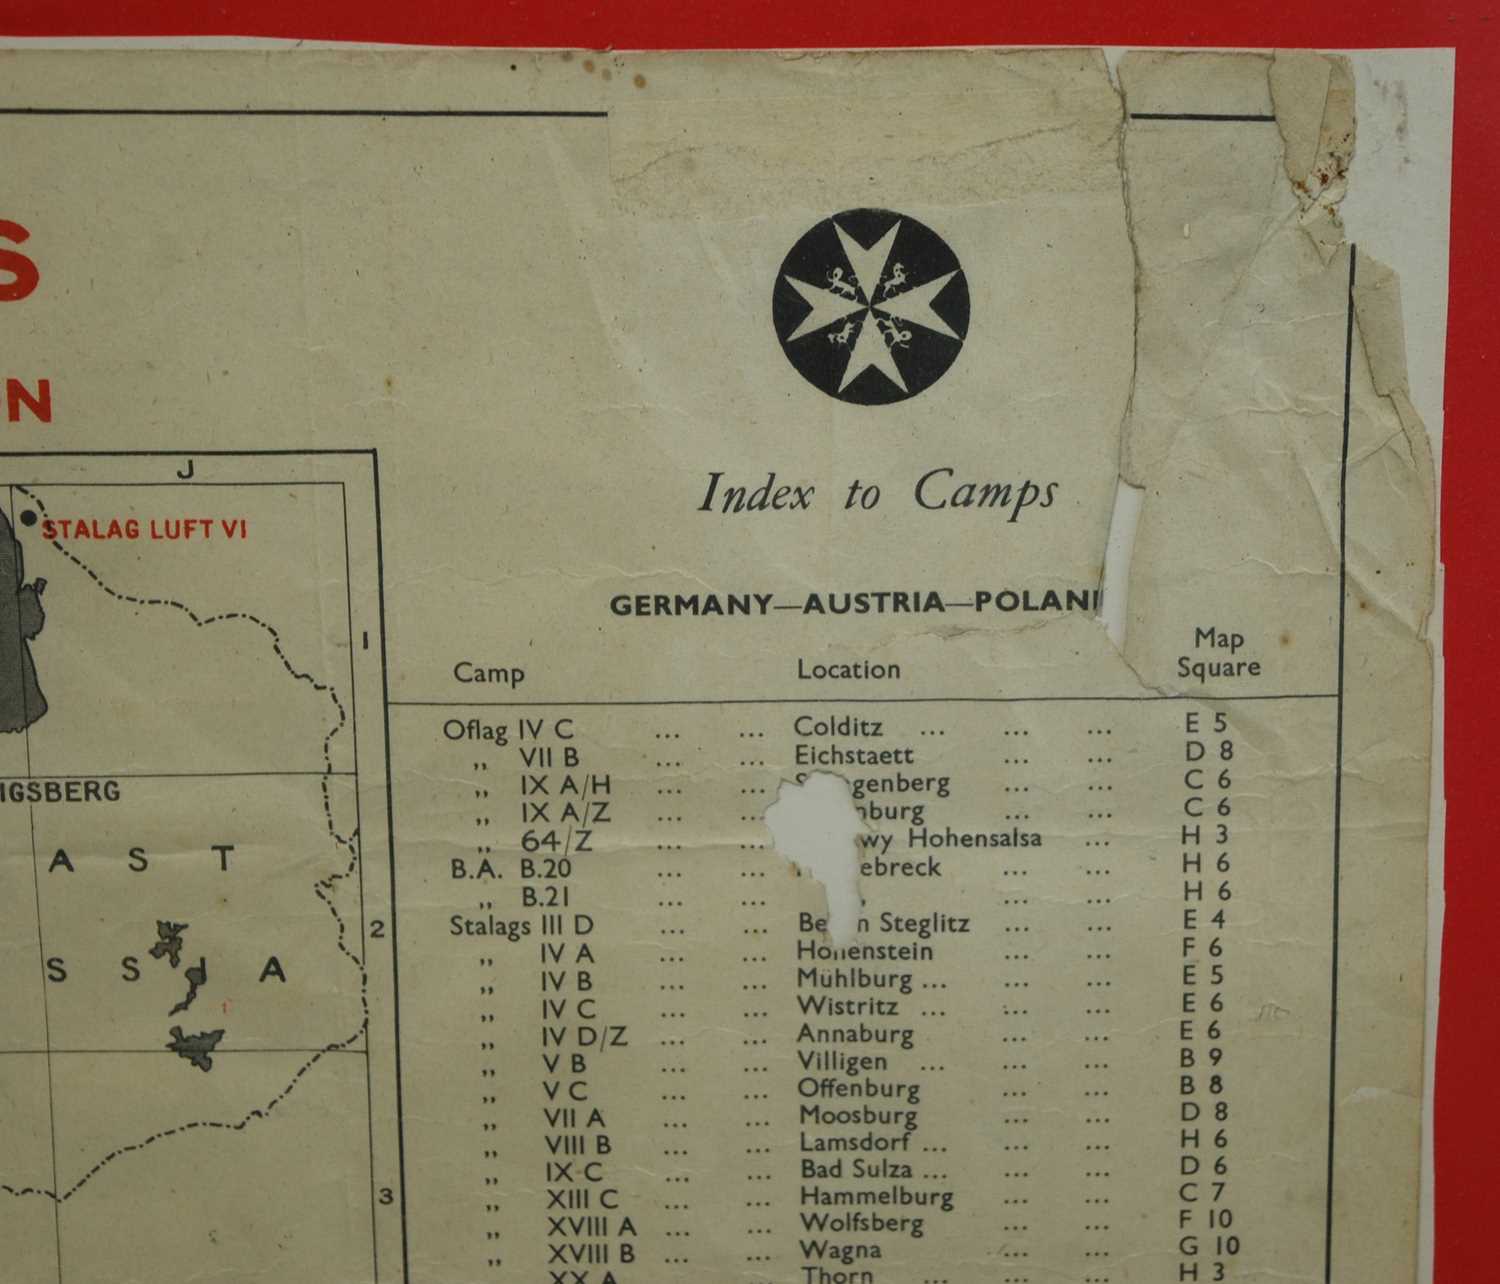 A WW II map of Northern Europe, British Prisoner of War Camps, Published by The Red Cross & St - Image 2 of 3